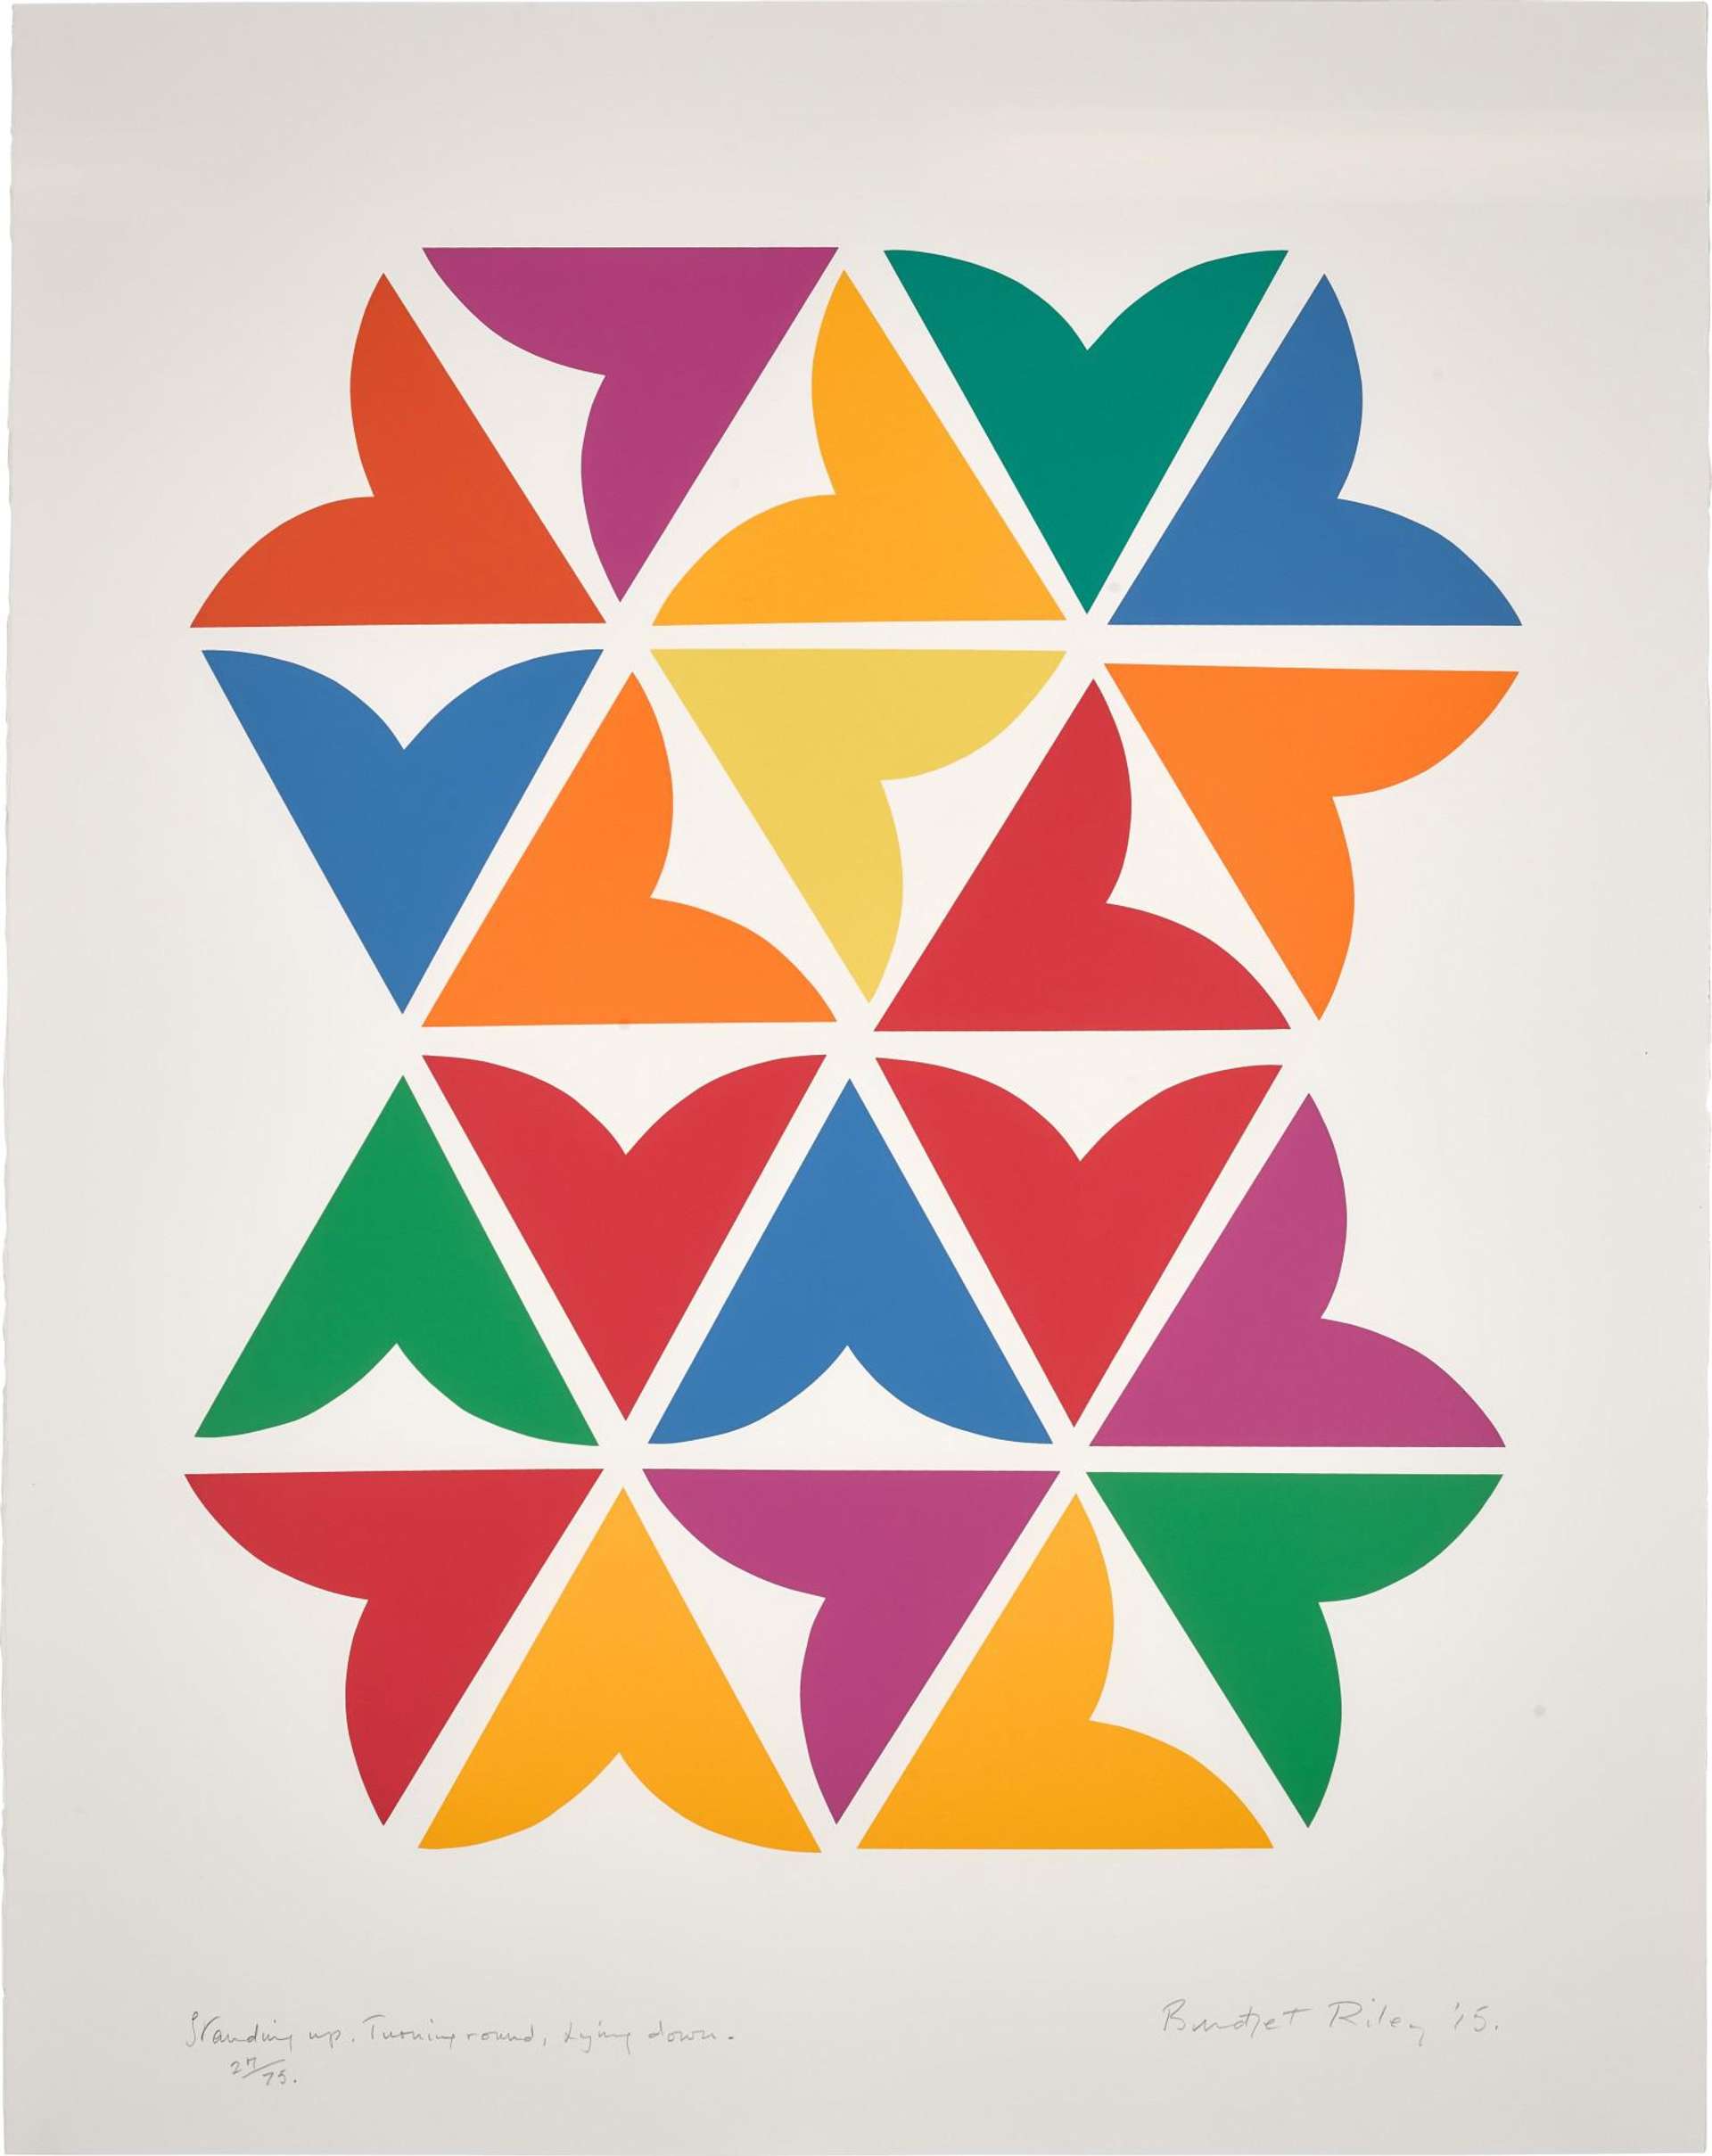 The print depicts a colourful pattern of shapes rendered in bold and vibrant block colours. The bright colours stand out against a plain white backdrop, drawing the viewer’s attention to the centre of the composition. Green, red, orange, yellow and blue dominate the composition, making this print lively and visually stimulating.